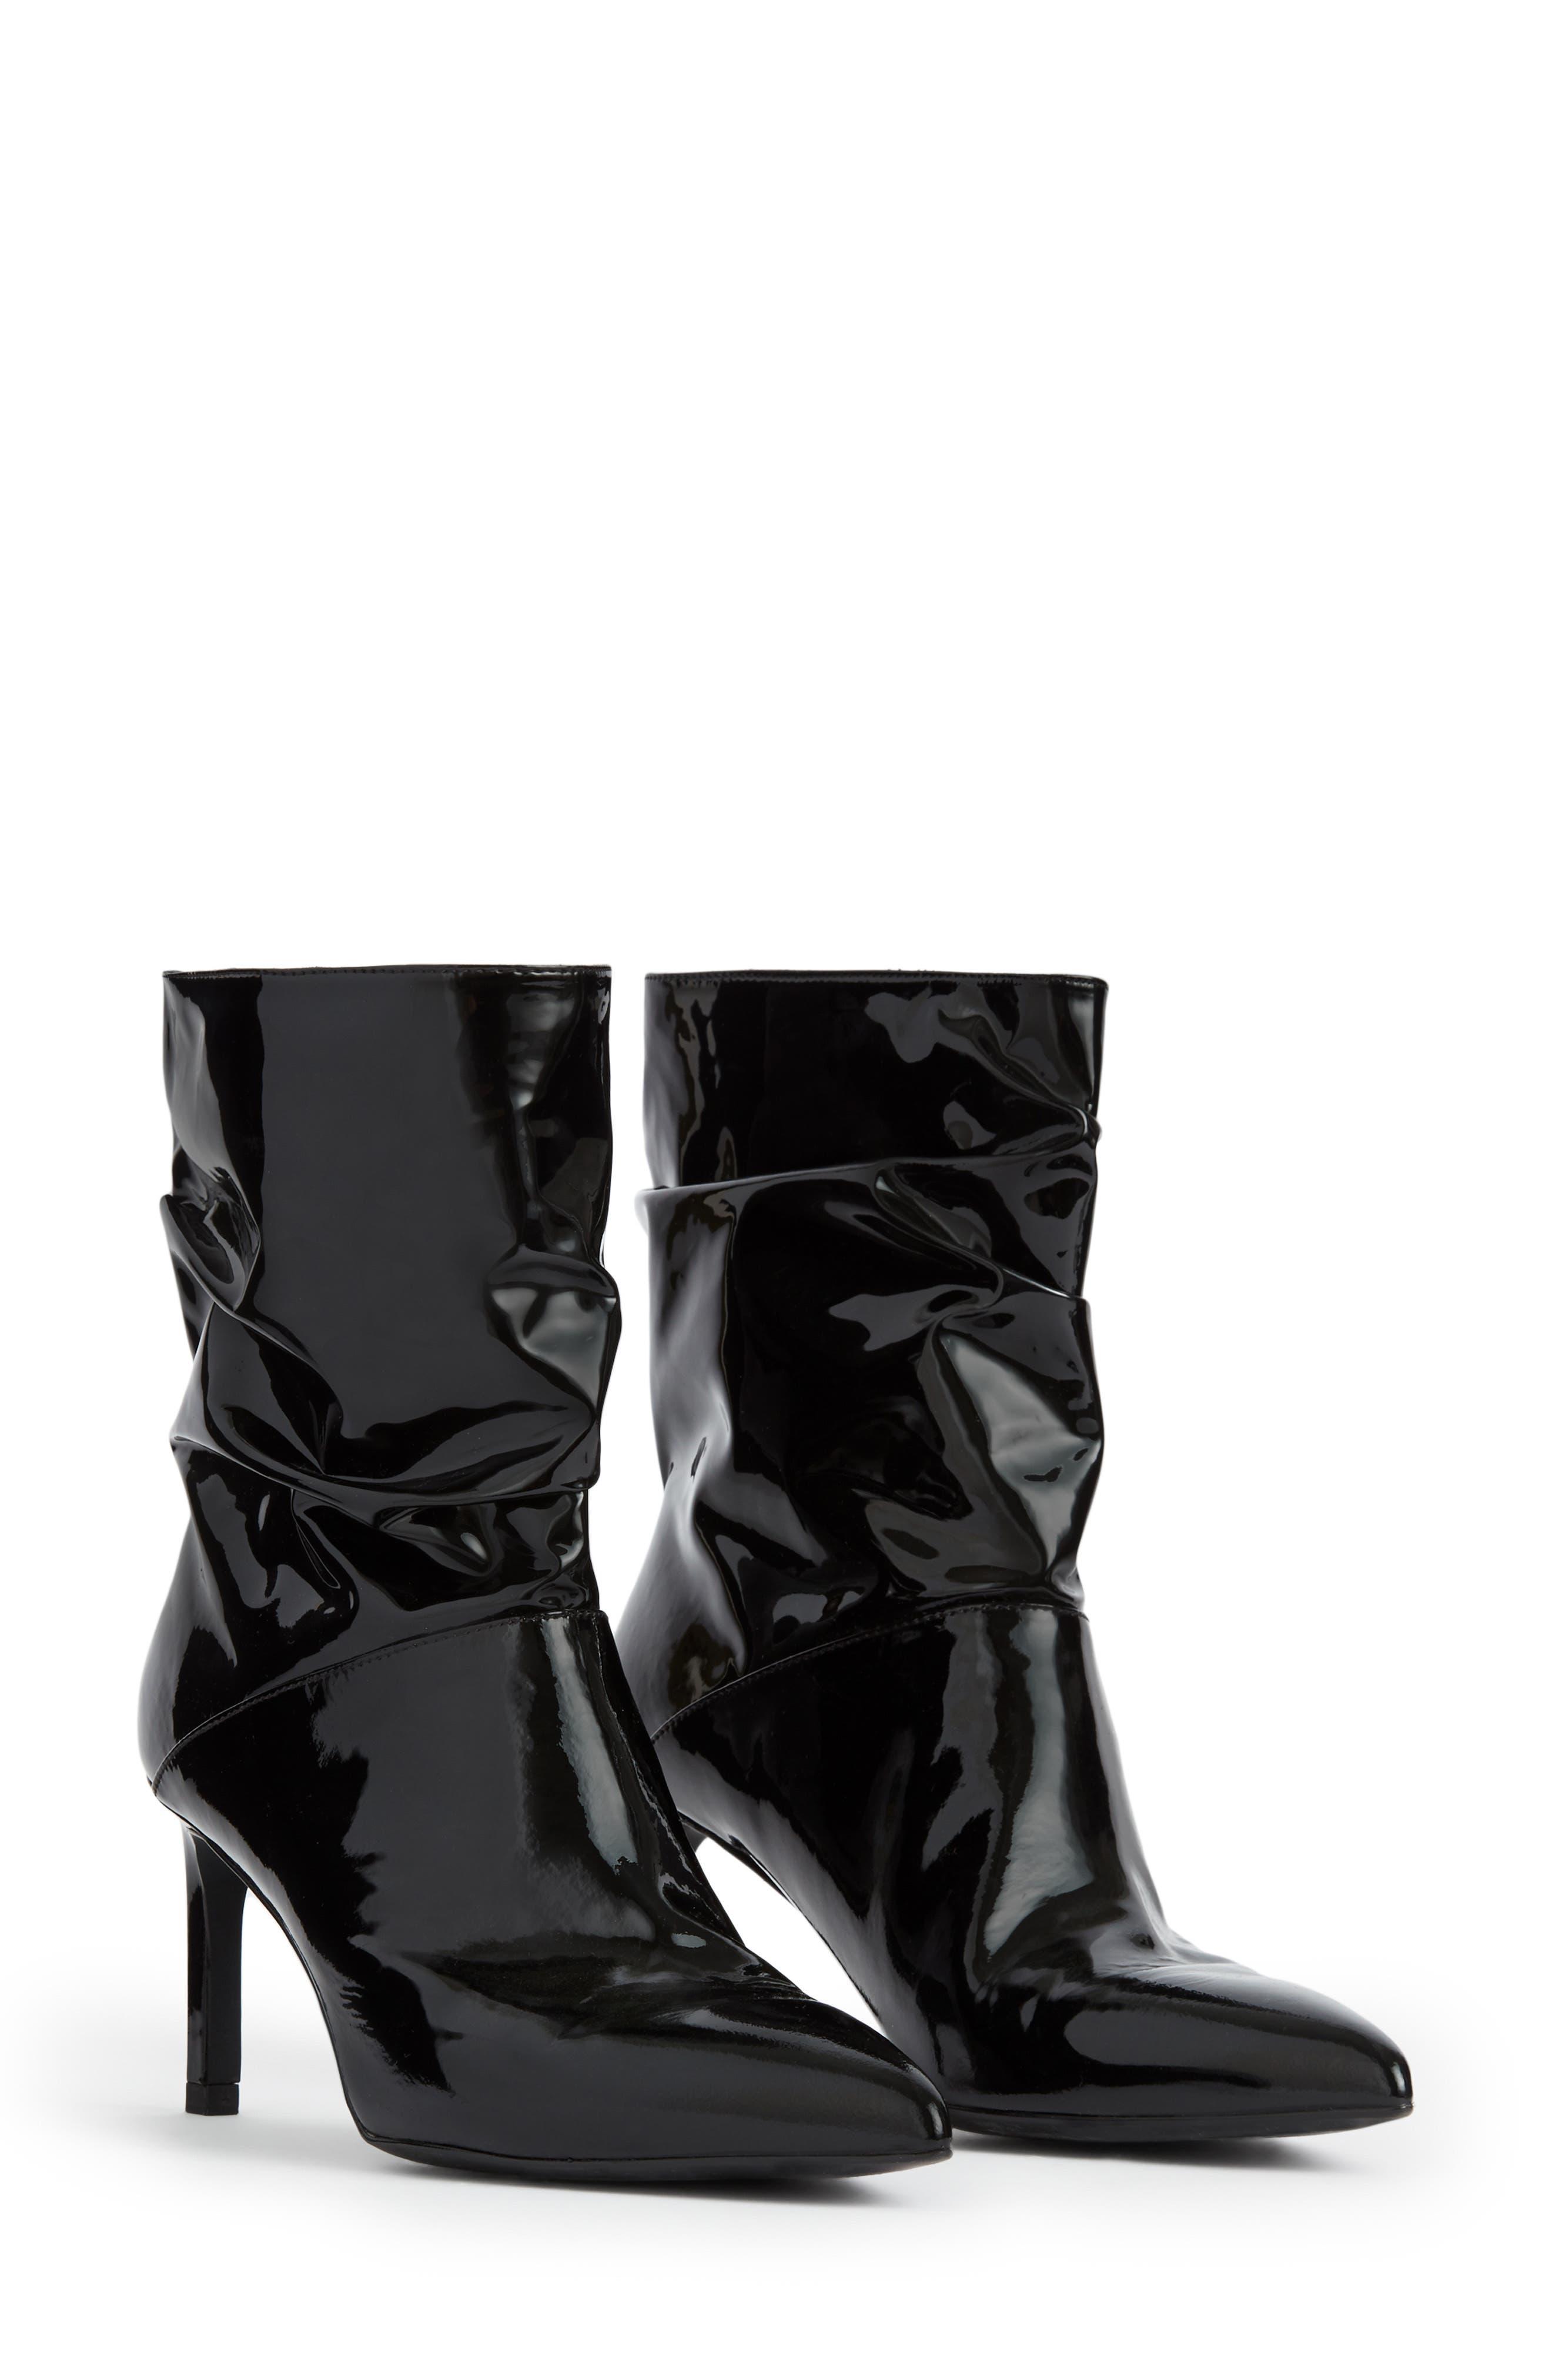 Shop AllSaints Orlana Metallic Embossed Leather Mid-Calf Boots